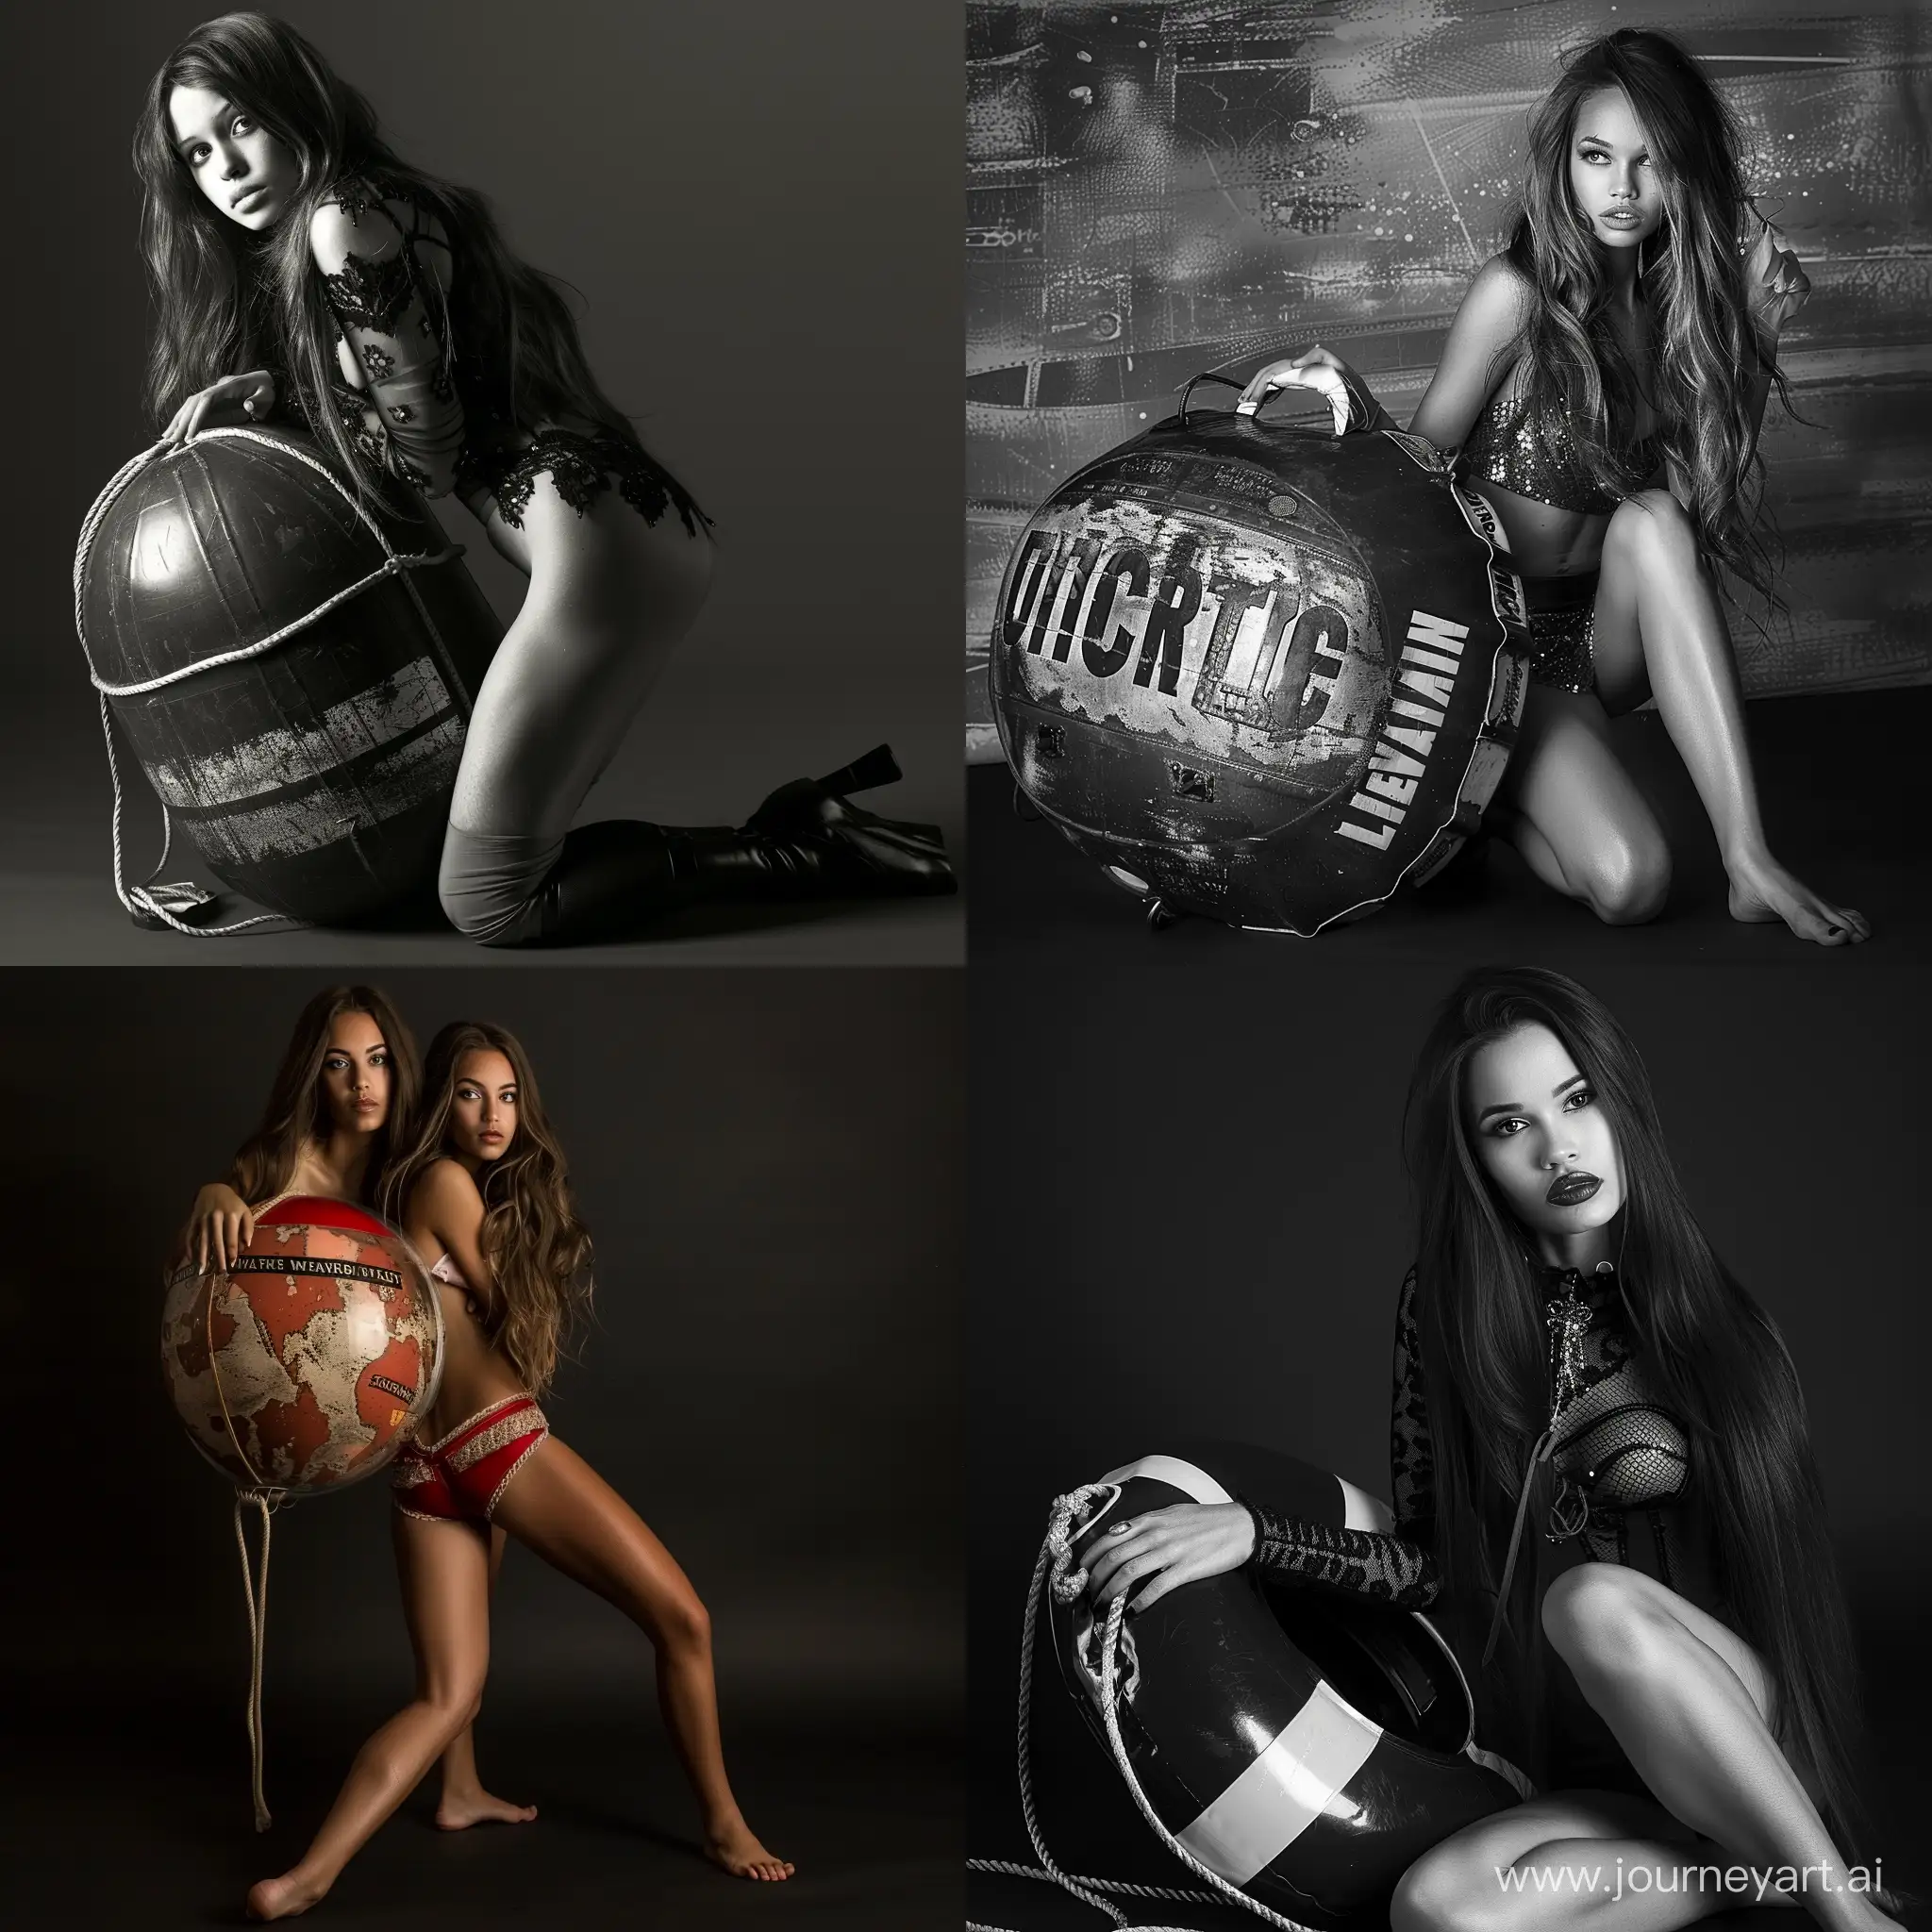 Elegant-Top-Model-Posing-with-Emergency-Buoy-Glamour-Portrait-of-Grace-and-Beauty